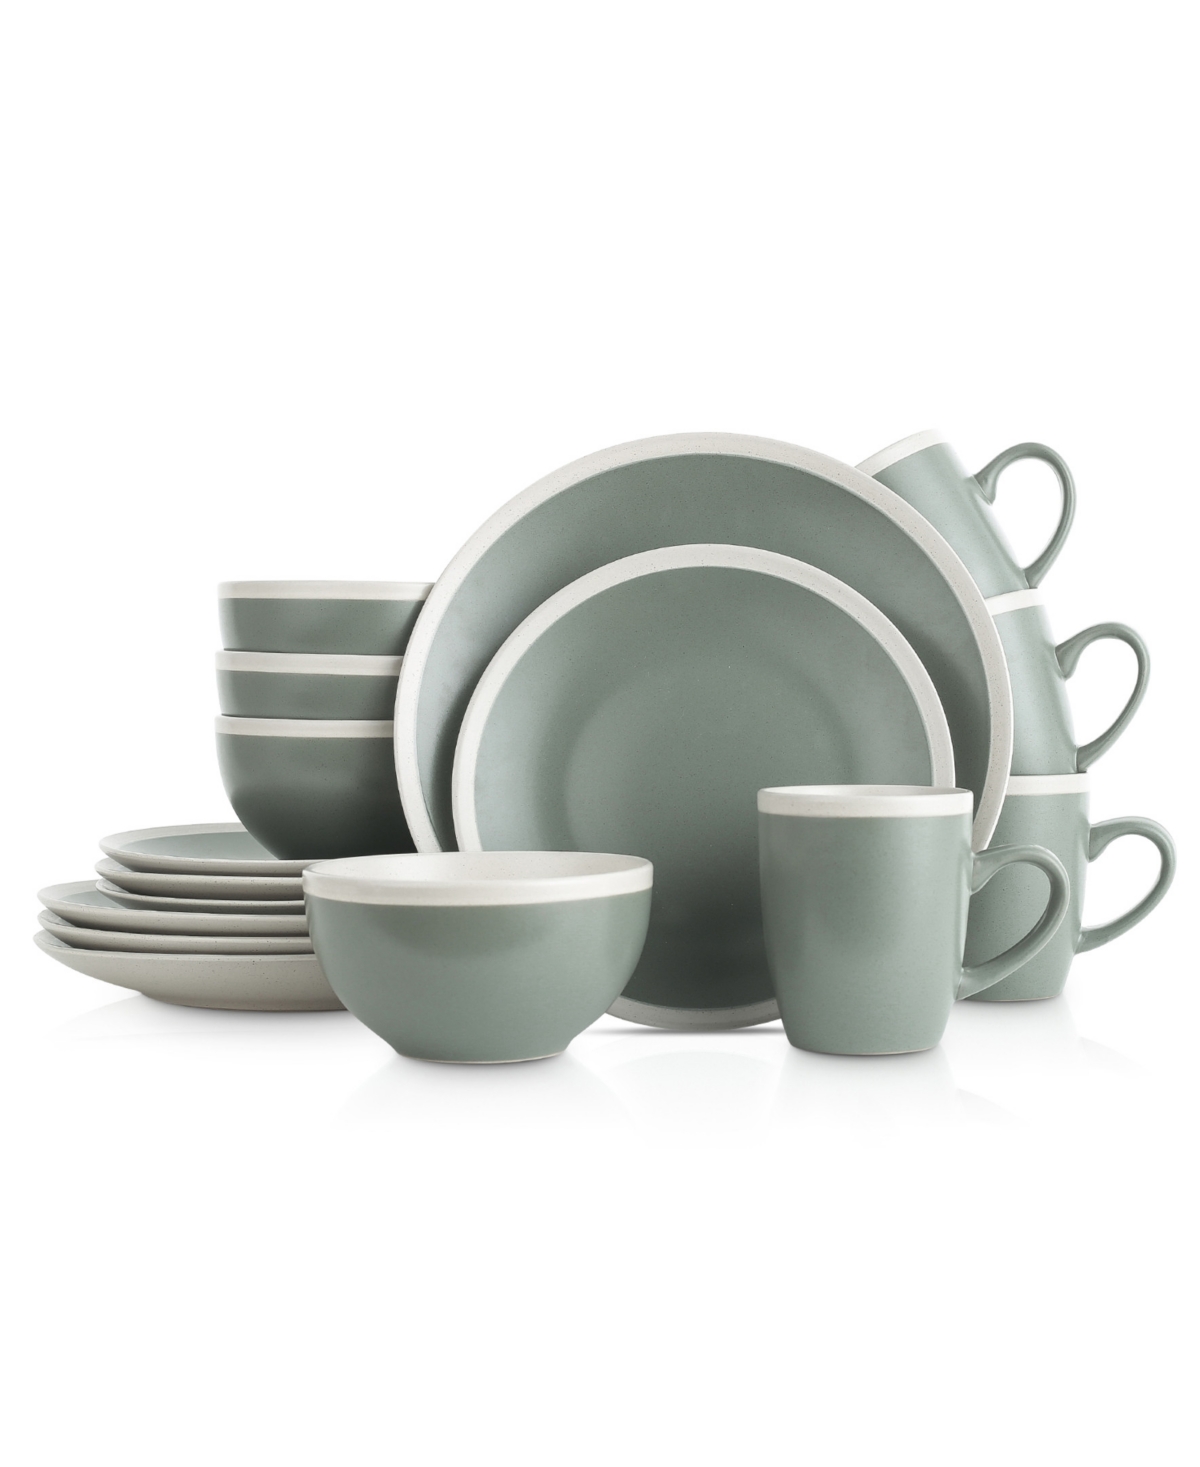 Serenity 16 Pieces Dinnerware Set, Service For 4 - Green and Cream